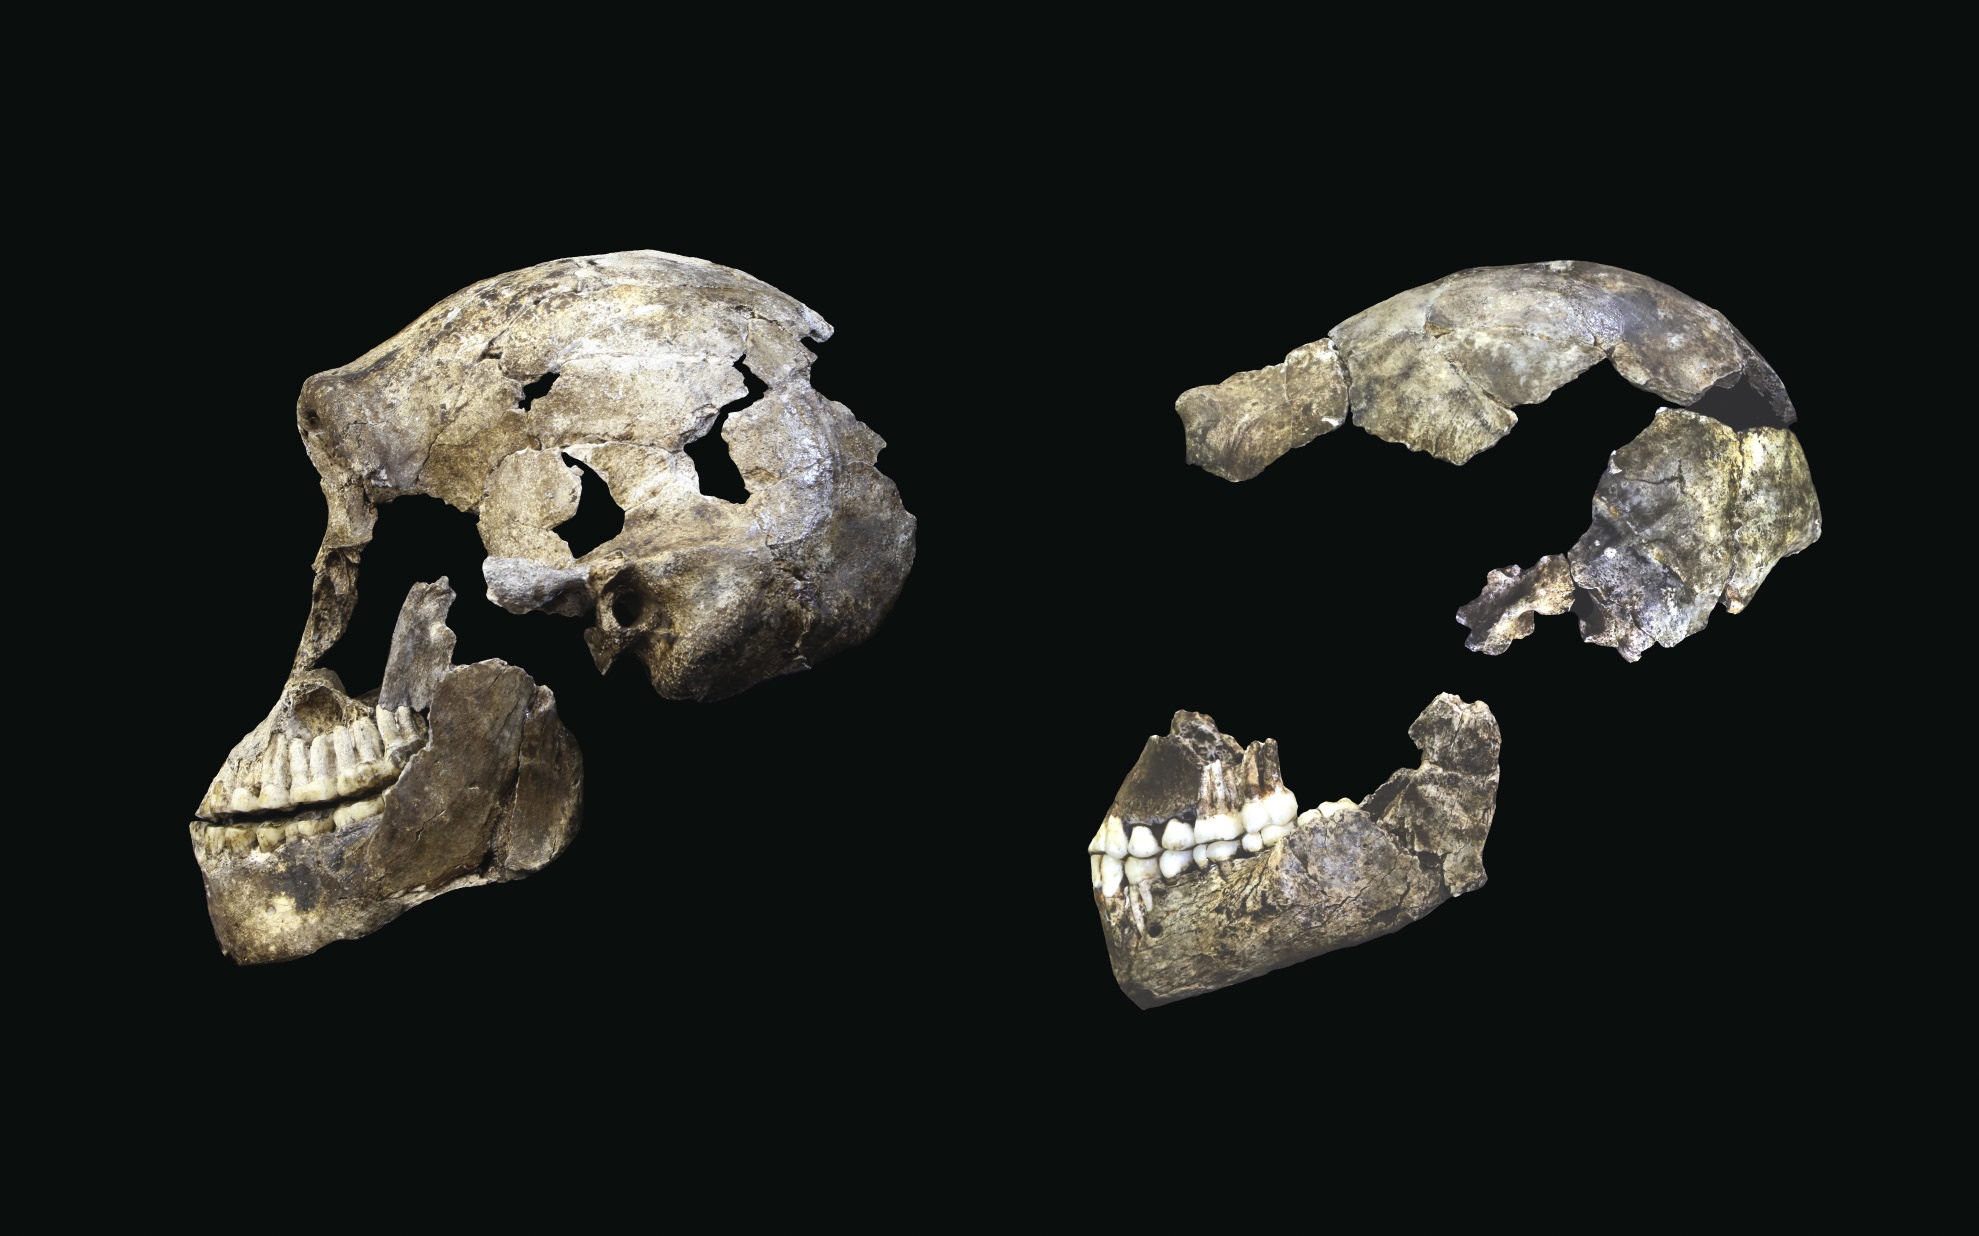 Two skulls of early humans found in the Cradle of Mankind